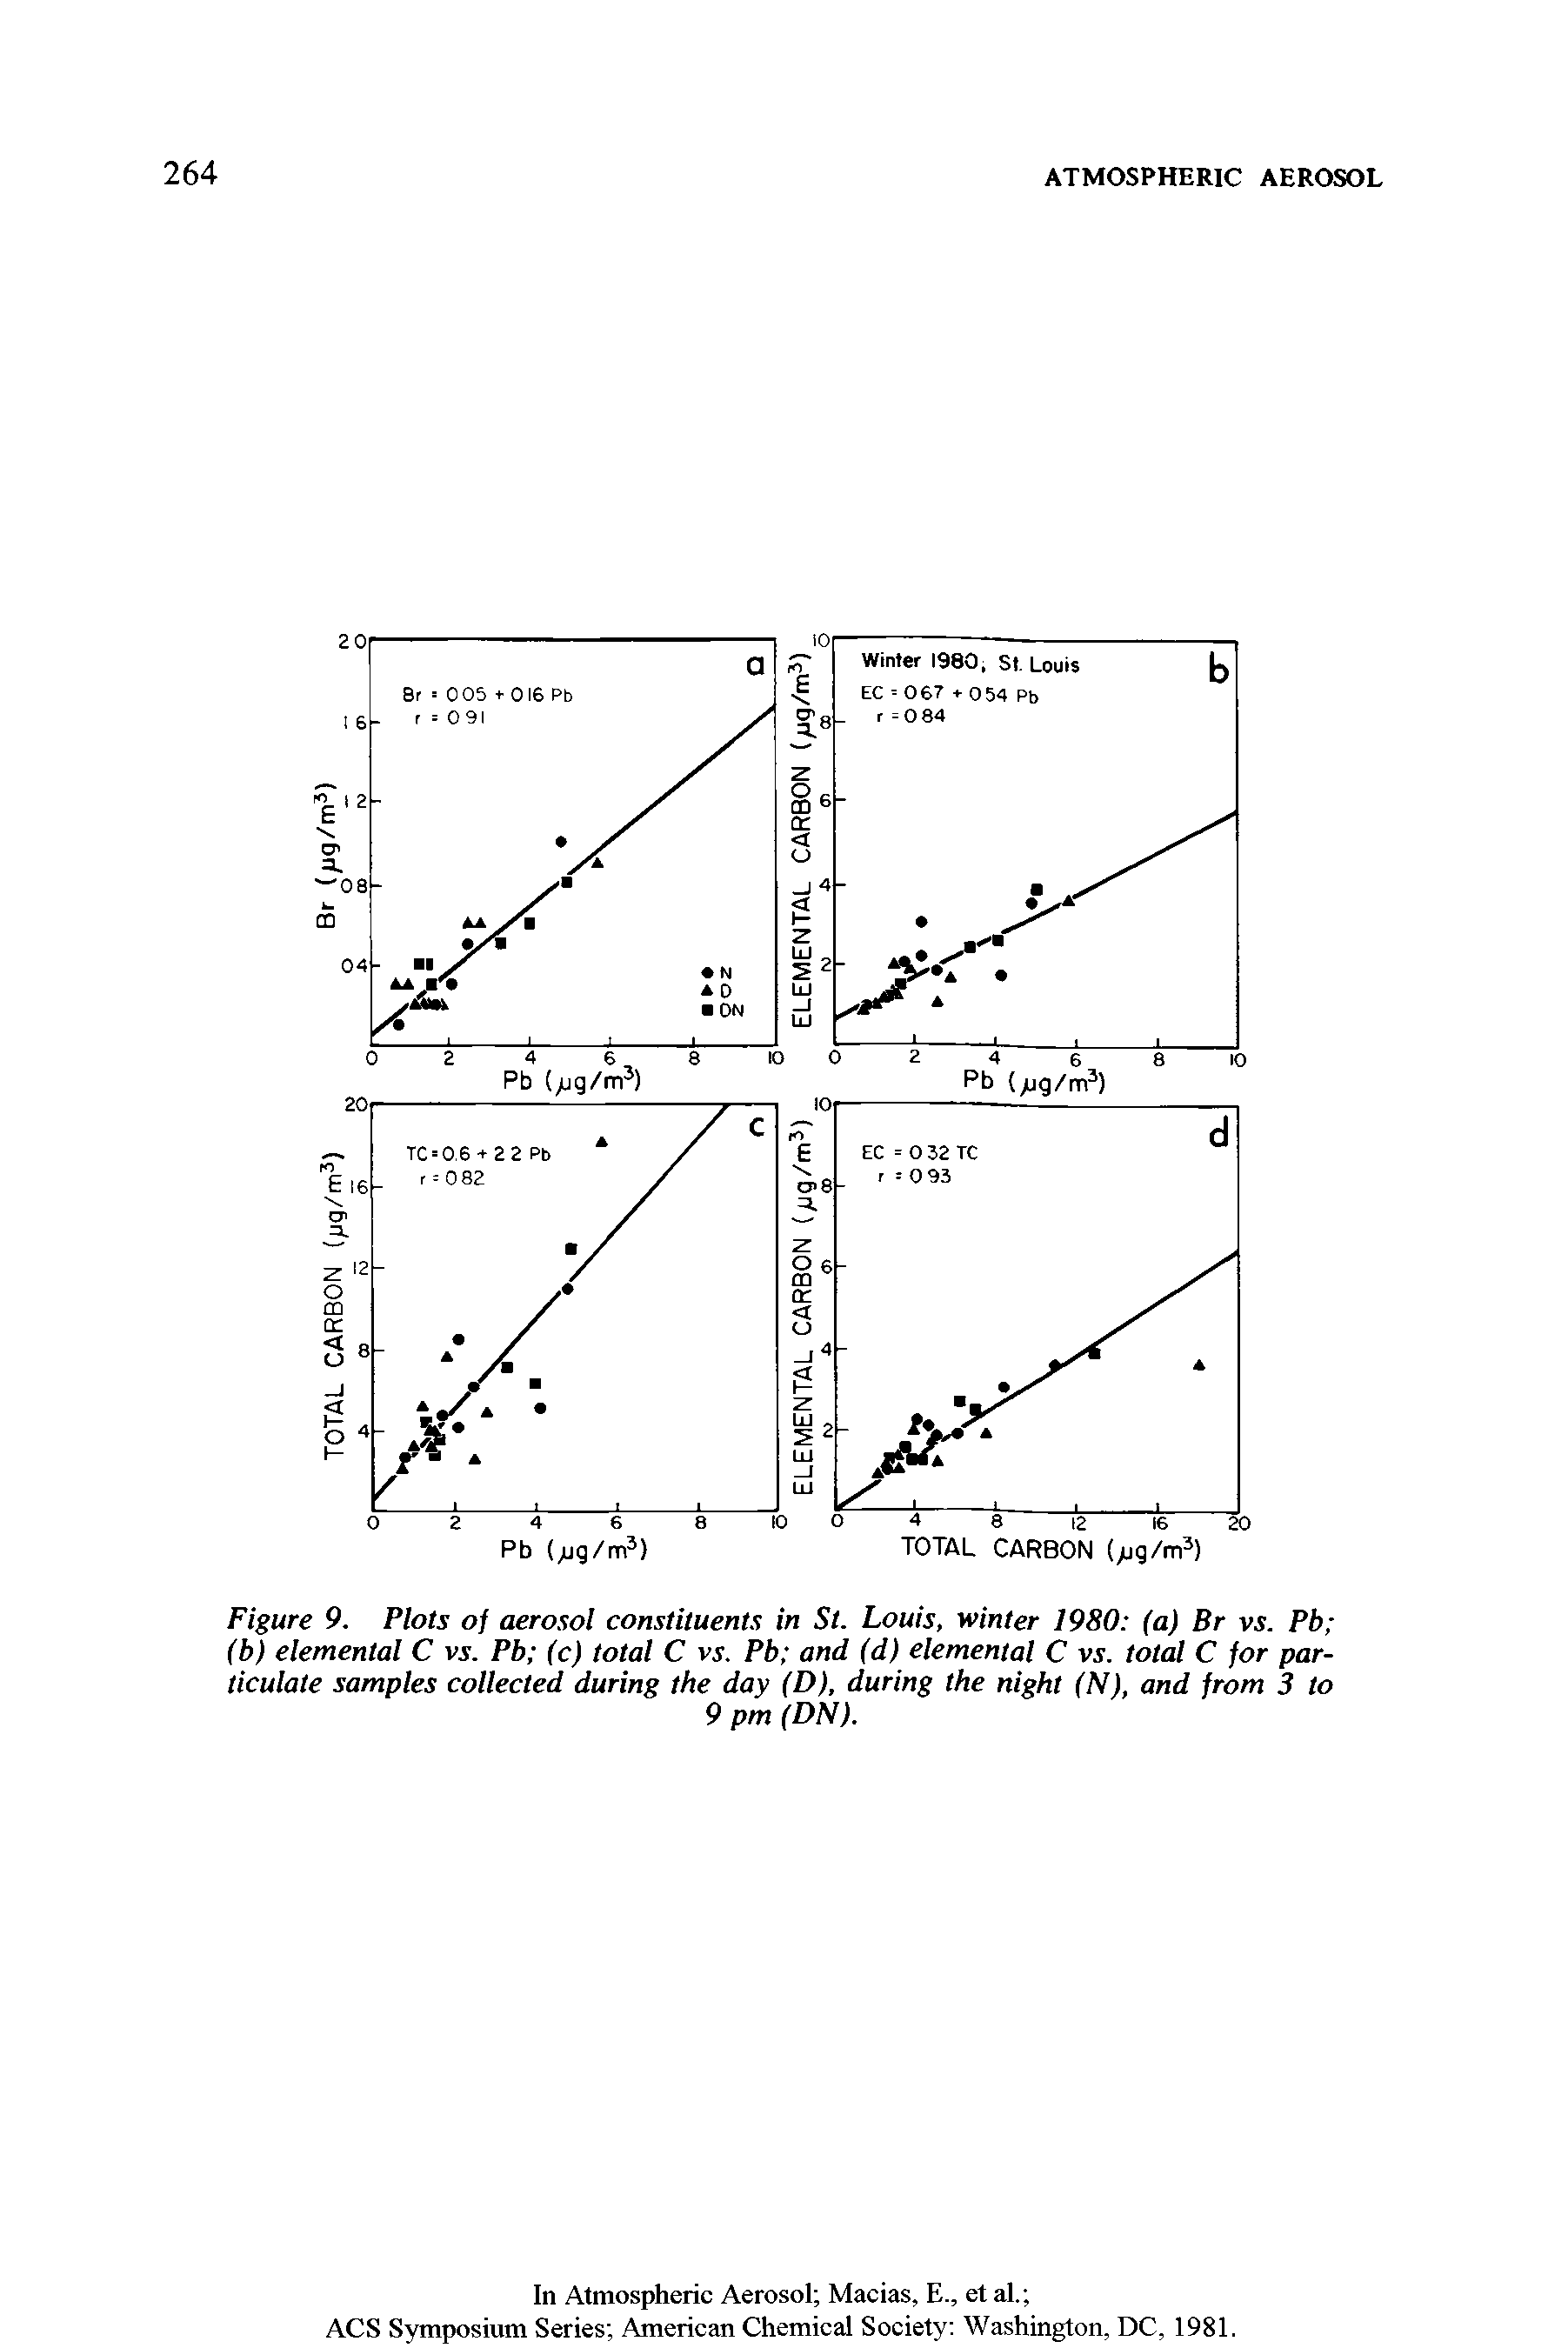 Figure 9. Plots of aerosol constituents in St. Louis, winter 1980 (a) Br vs. Pb (b) elemental C vj. Pb (c) total C vs. Pb and (d) elemental C vs. total C for particulate samples collected during the day (D), during the night (N), and from 3 to...